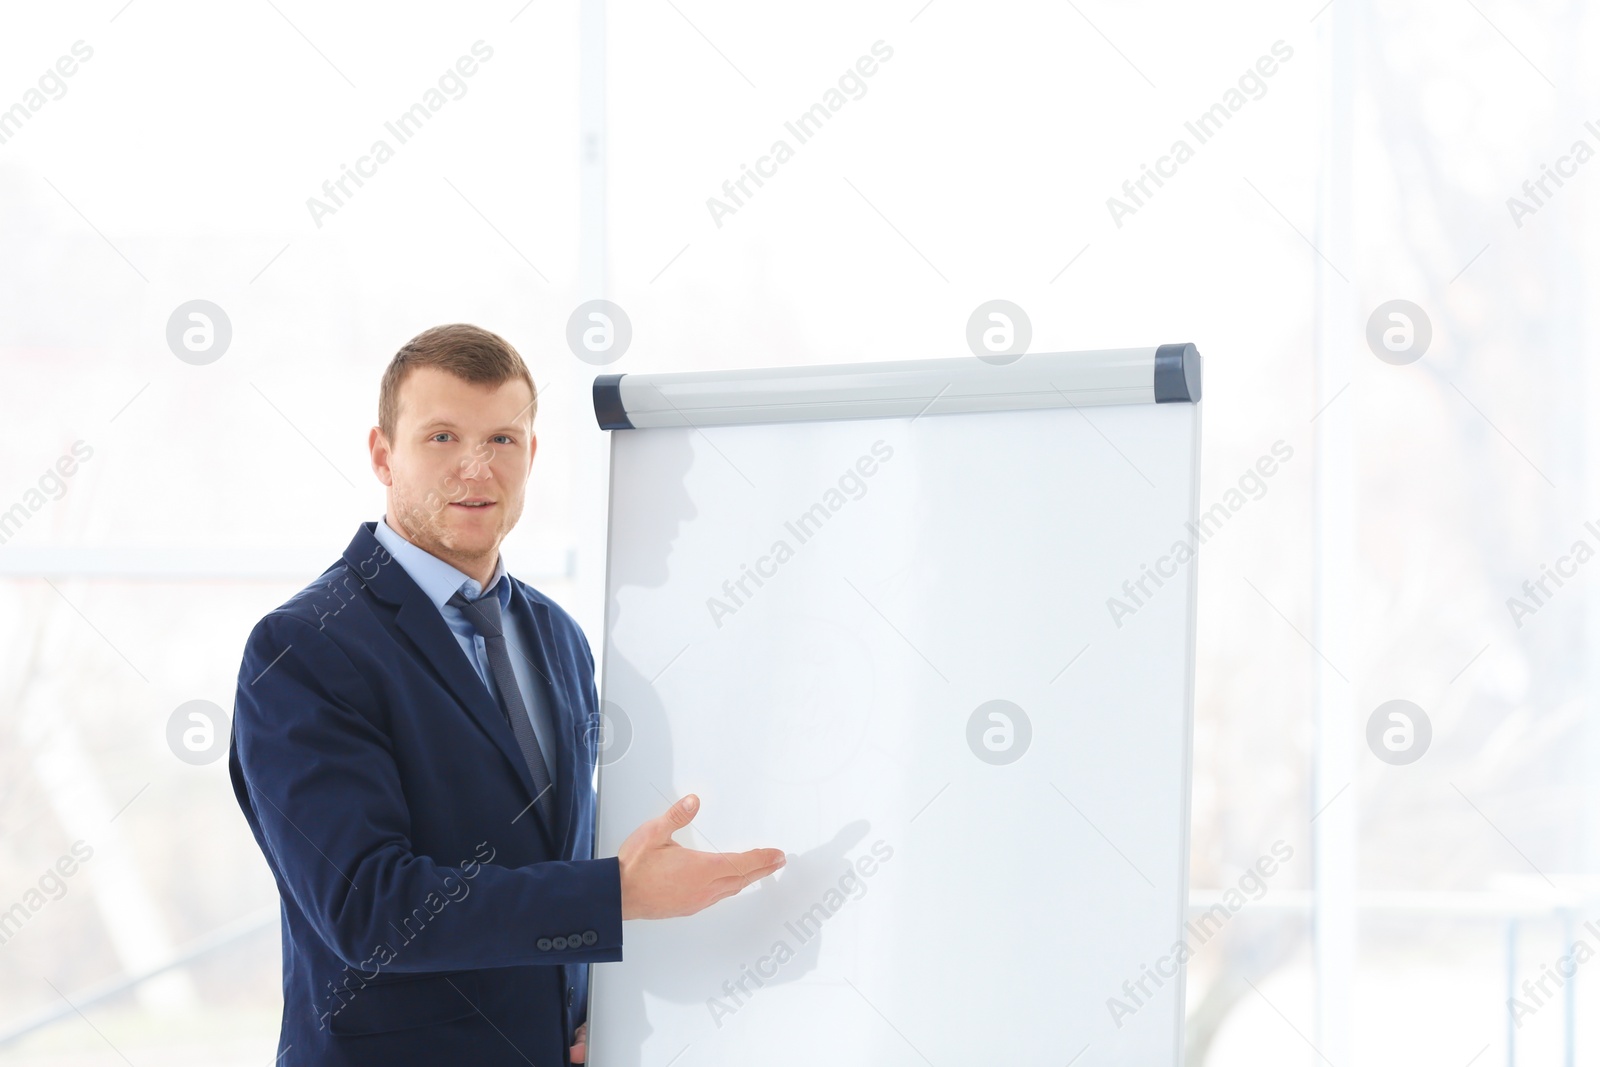 Photo of Business trainer giving presentation on flip chart board indoors